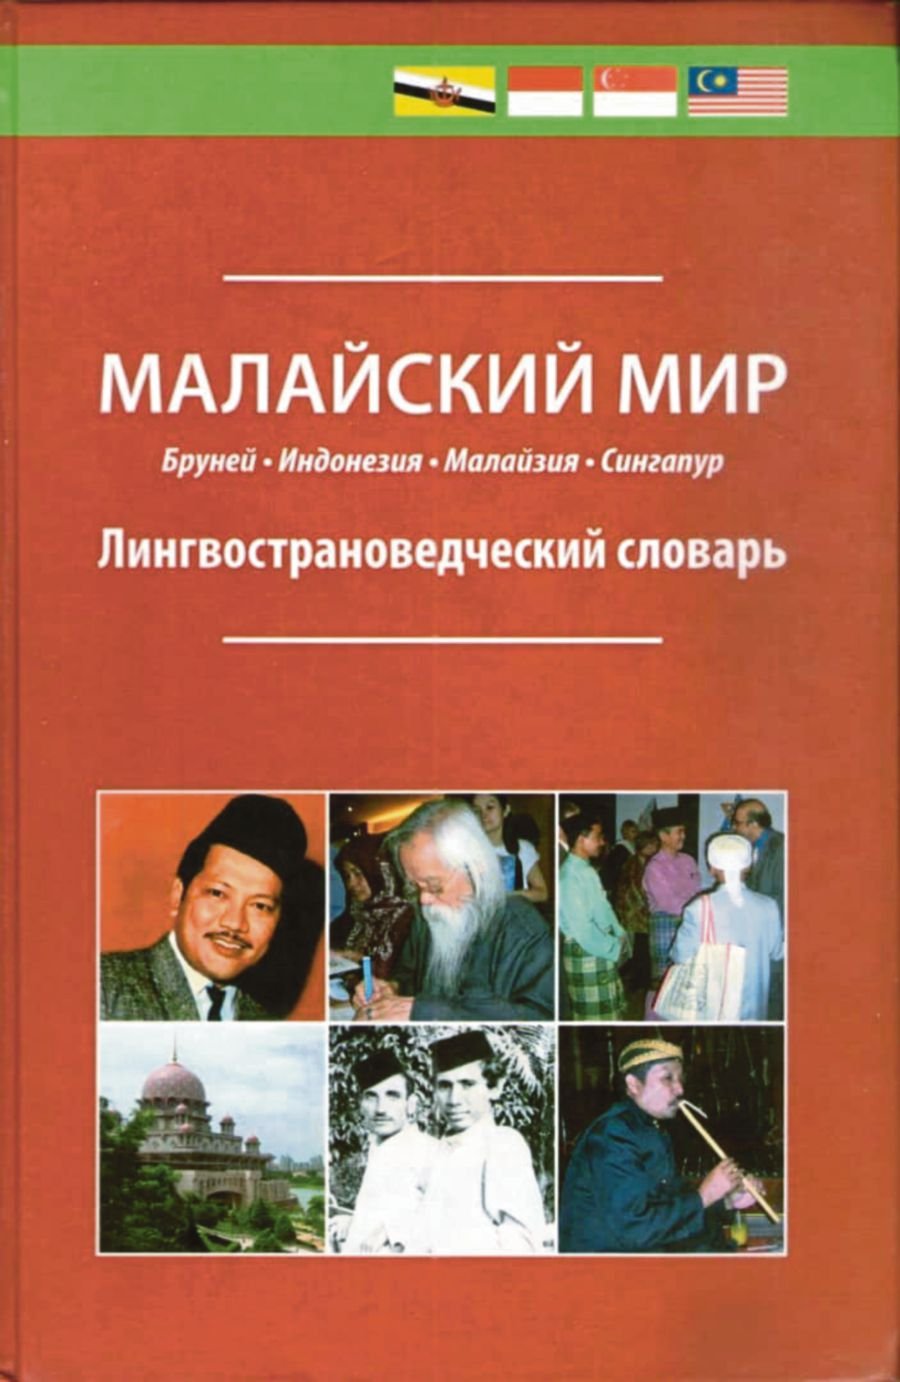  The cover of the book ‘Malay World. Lingua-Cultural Dictionary’, which is a project by the writer that won a bronze medal at the Research, Invention and Innovation Expo recently. PIC COURTESY OF WRITER